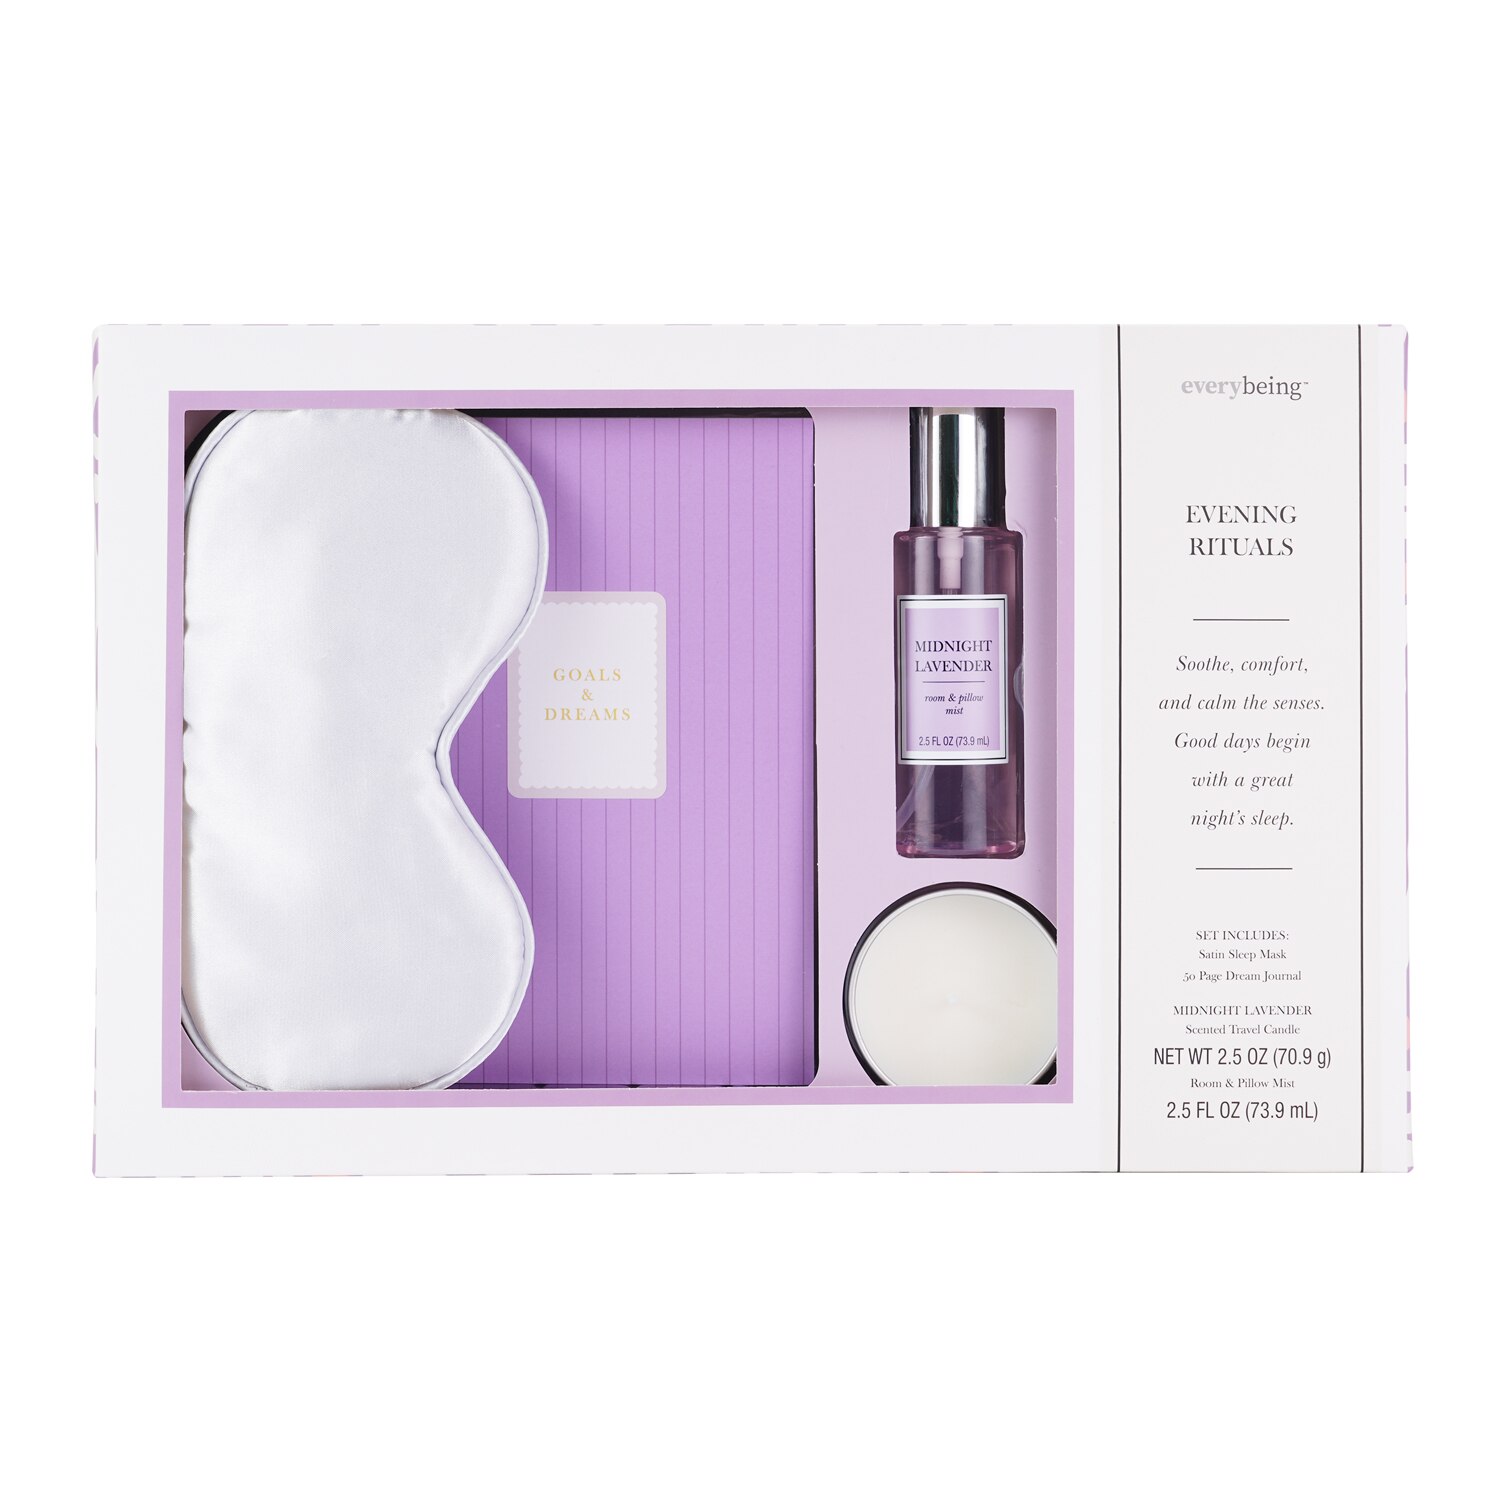 Everybeing Evening Rituals PM Gift Set (Includes Satin Sleep Mask, 50 Page Dream Journal, Midnight Lavender Scented Travel Candle And Room & Pillow Mi